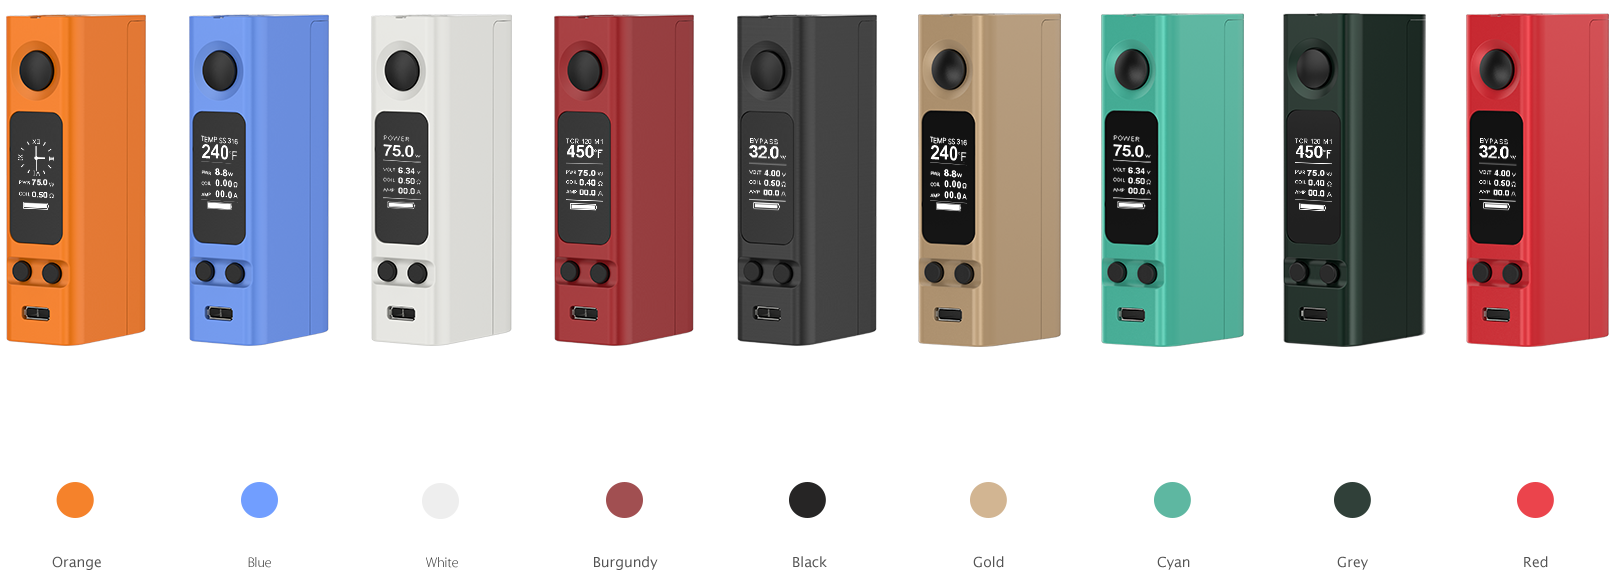 eVic_VTwo_Mini_01.png